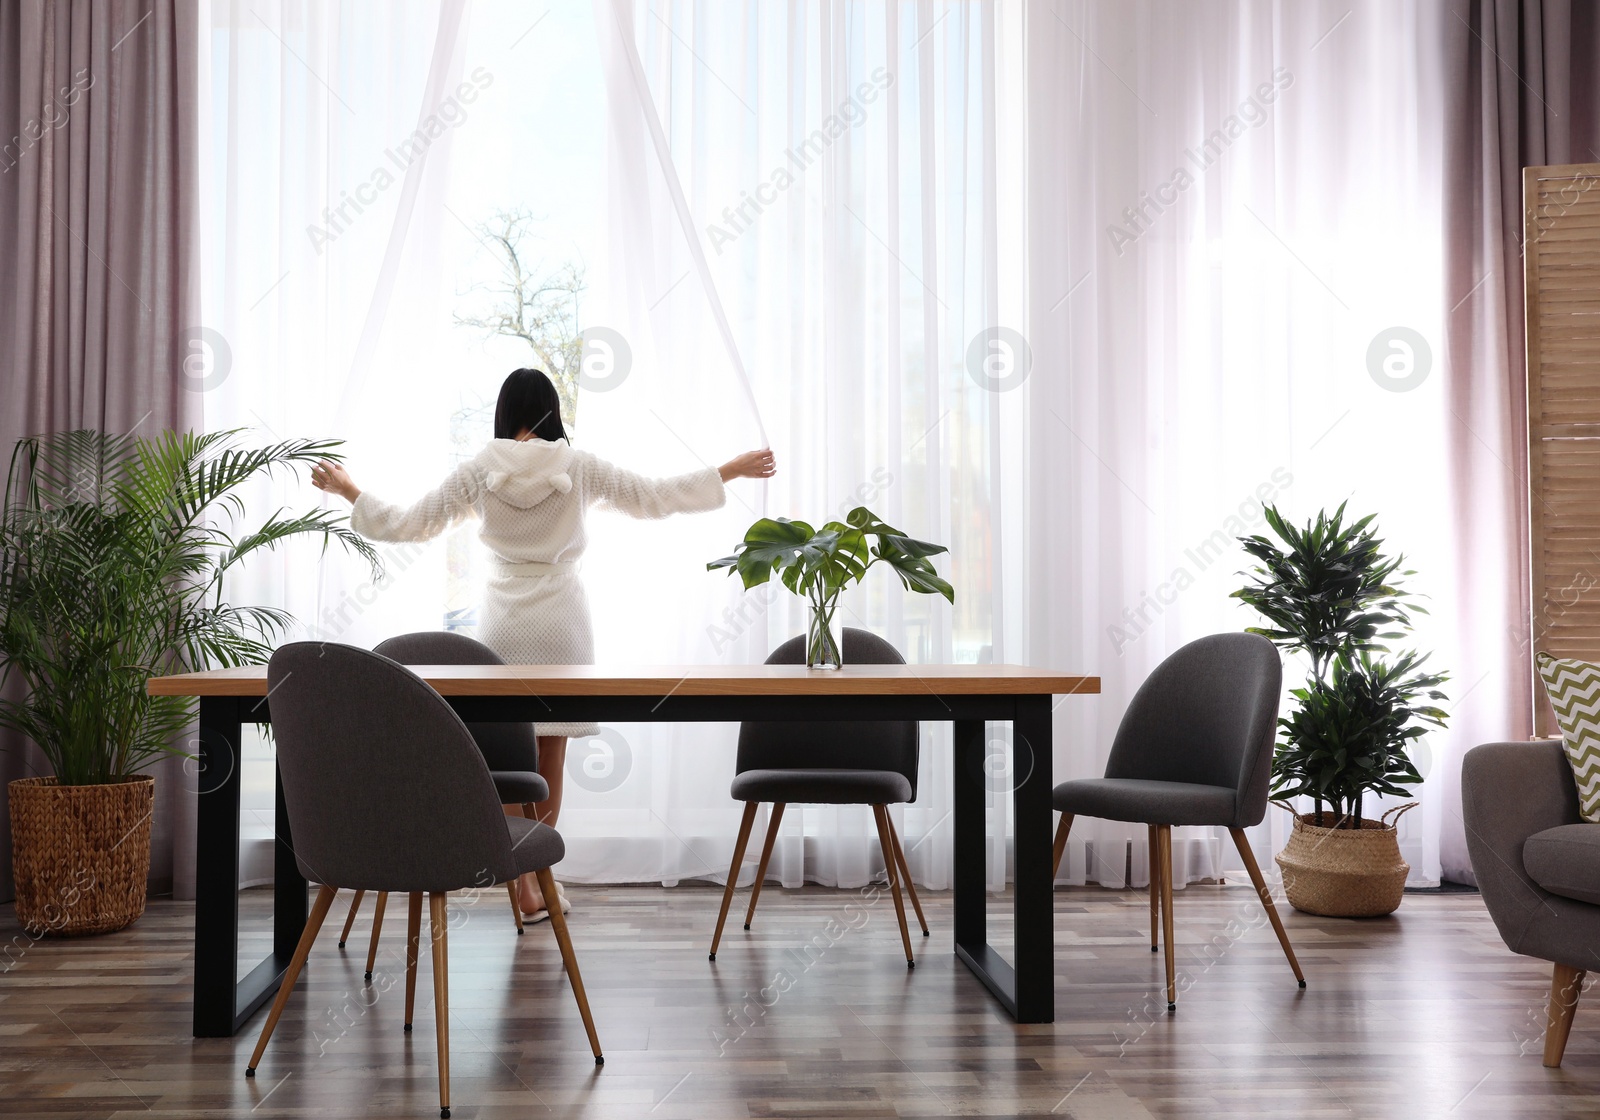 Photo of Woman near window in room decorated with plants. Home design ideas